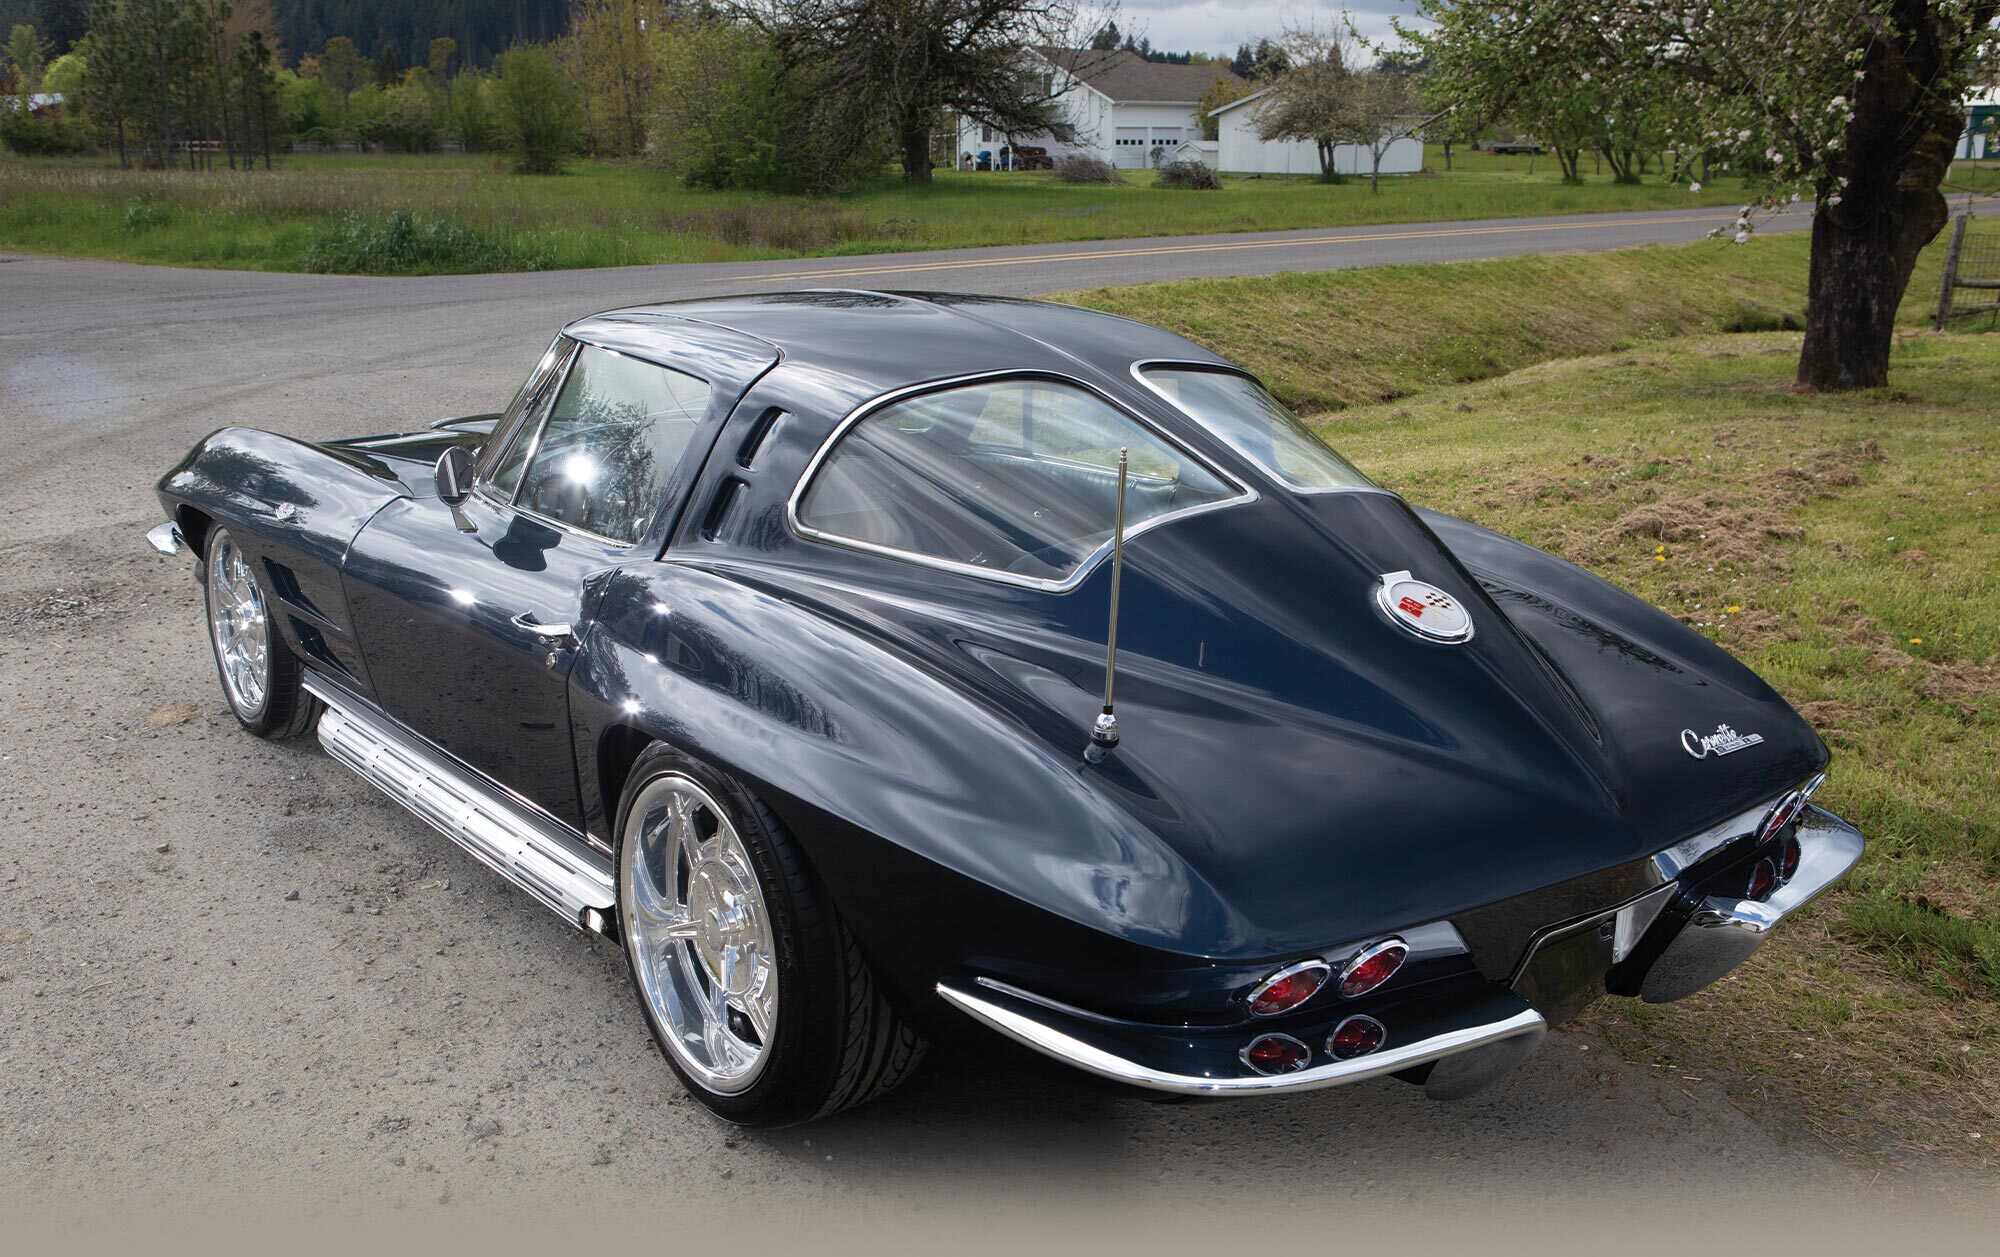 three quarter back view of Sam Smith's black '63 Corvette Sting Ray parked on a road side